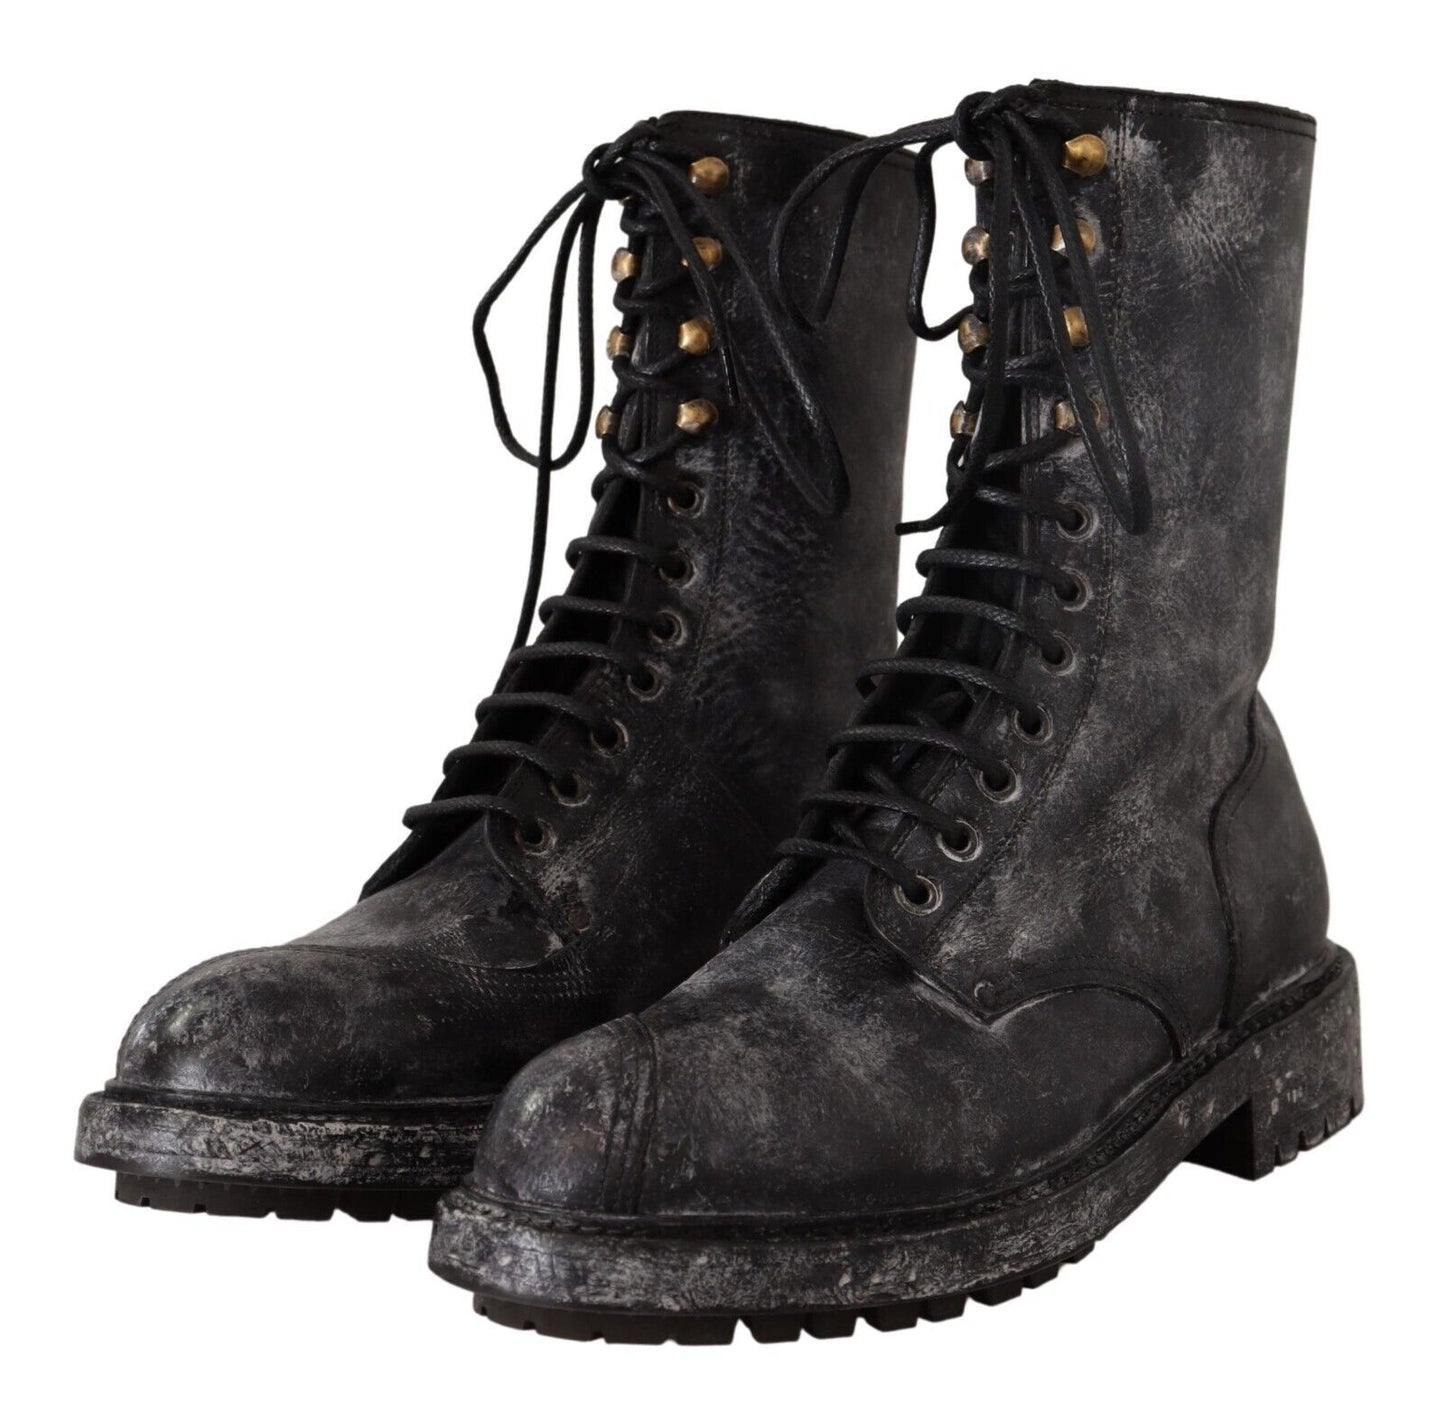 Exclusive Leather Combat Boots in Black & Grey